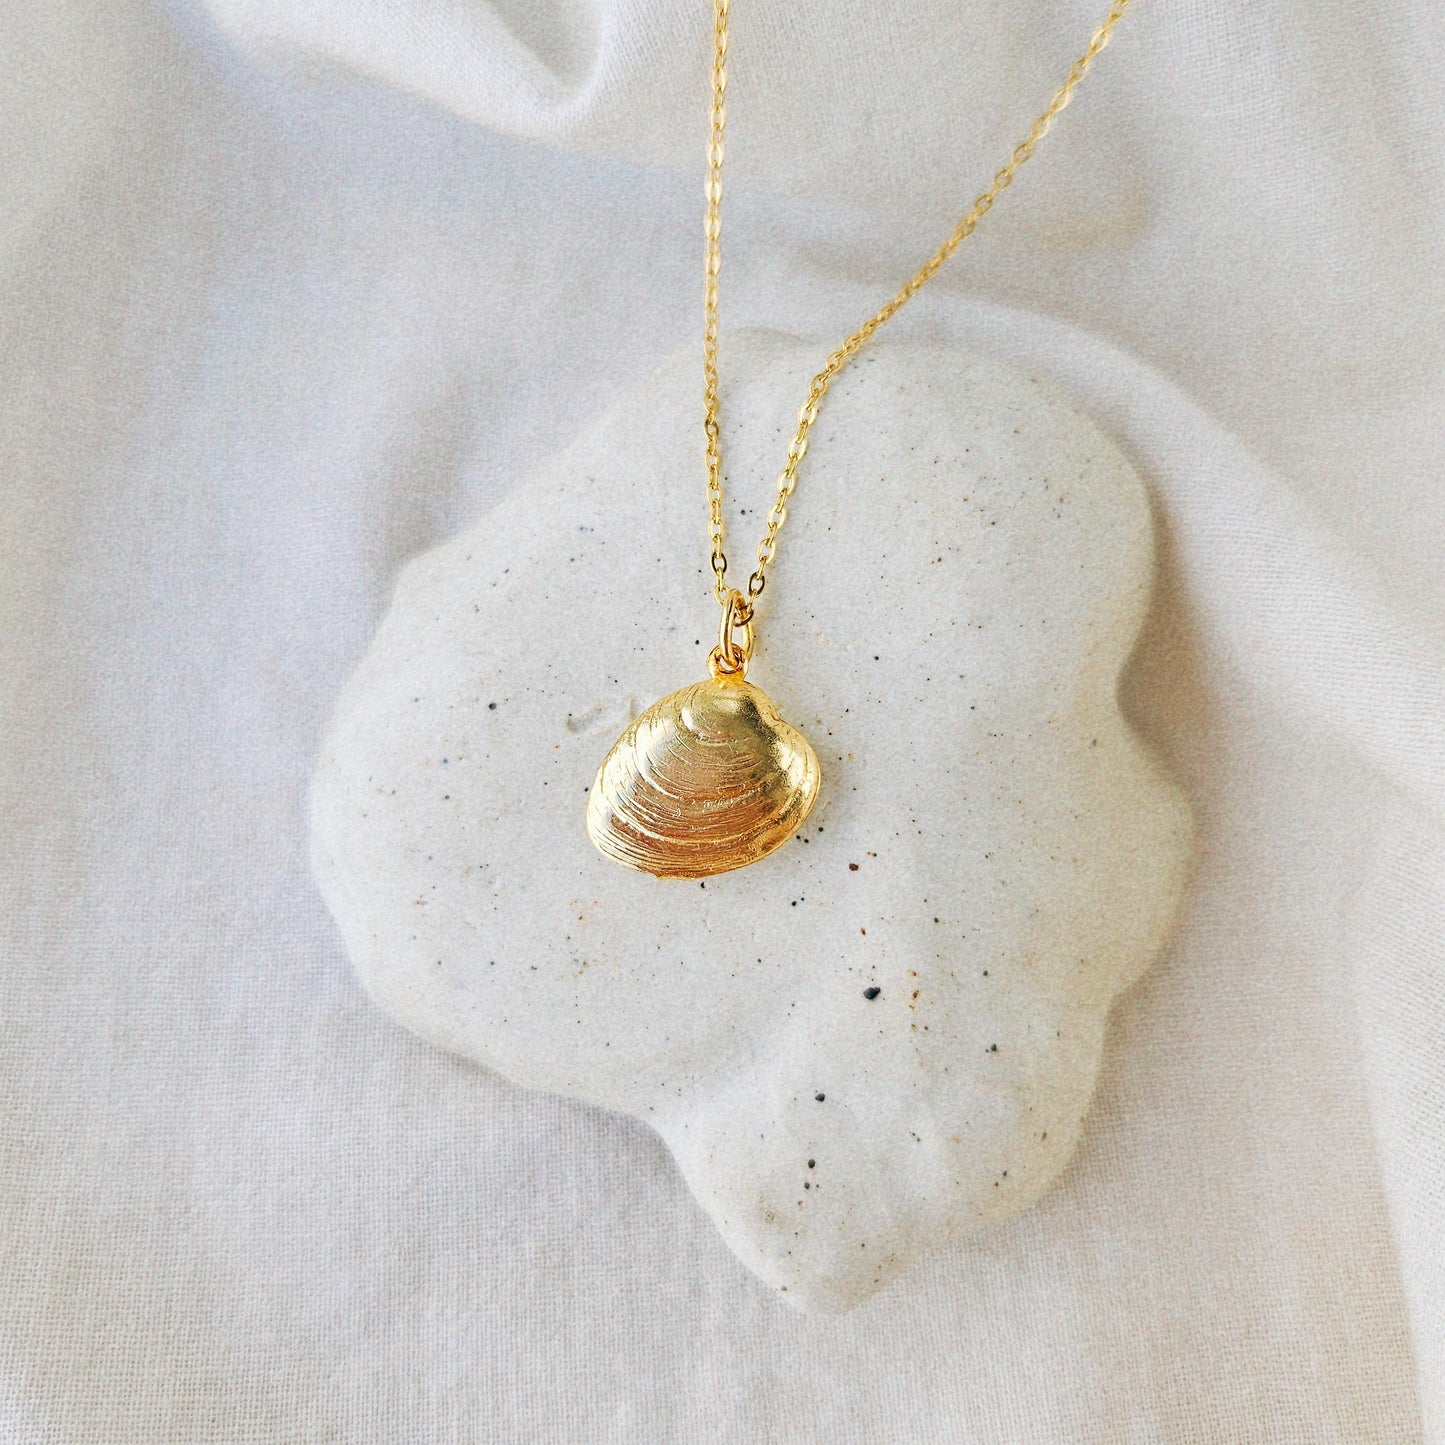 Vintage Clam Shell Charm Necklace